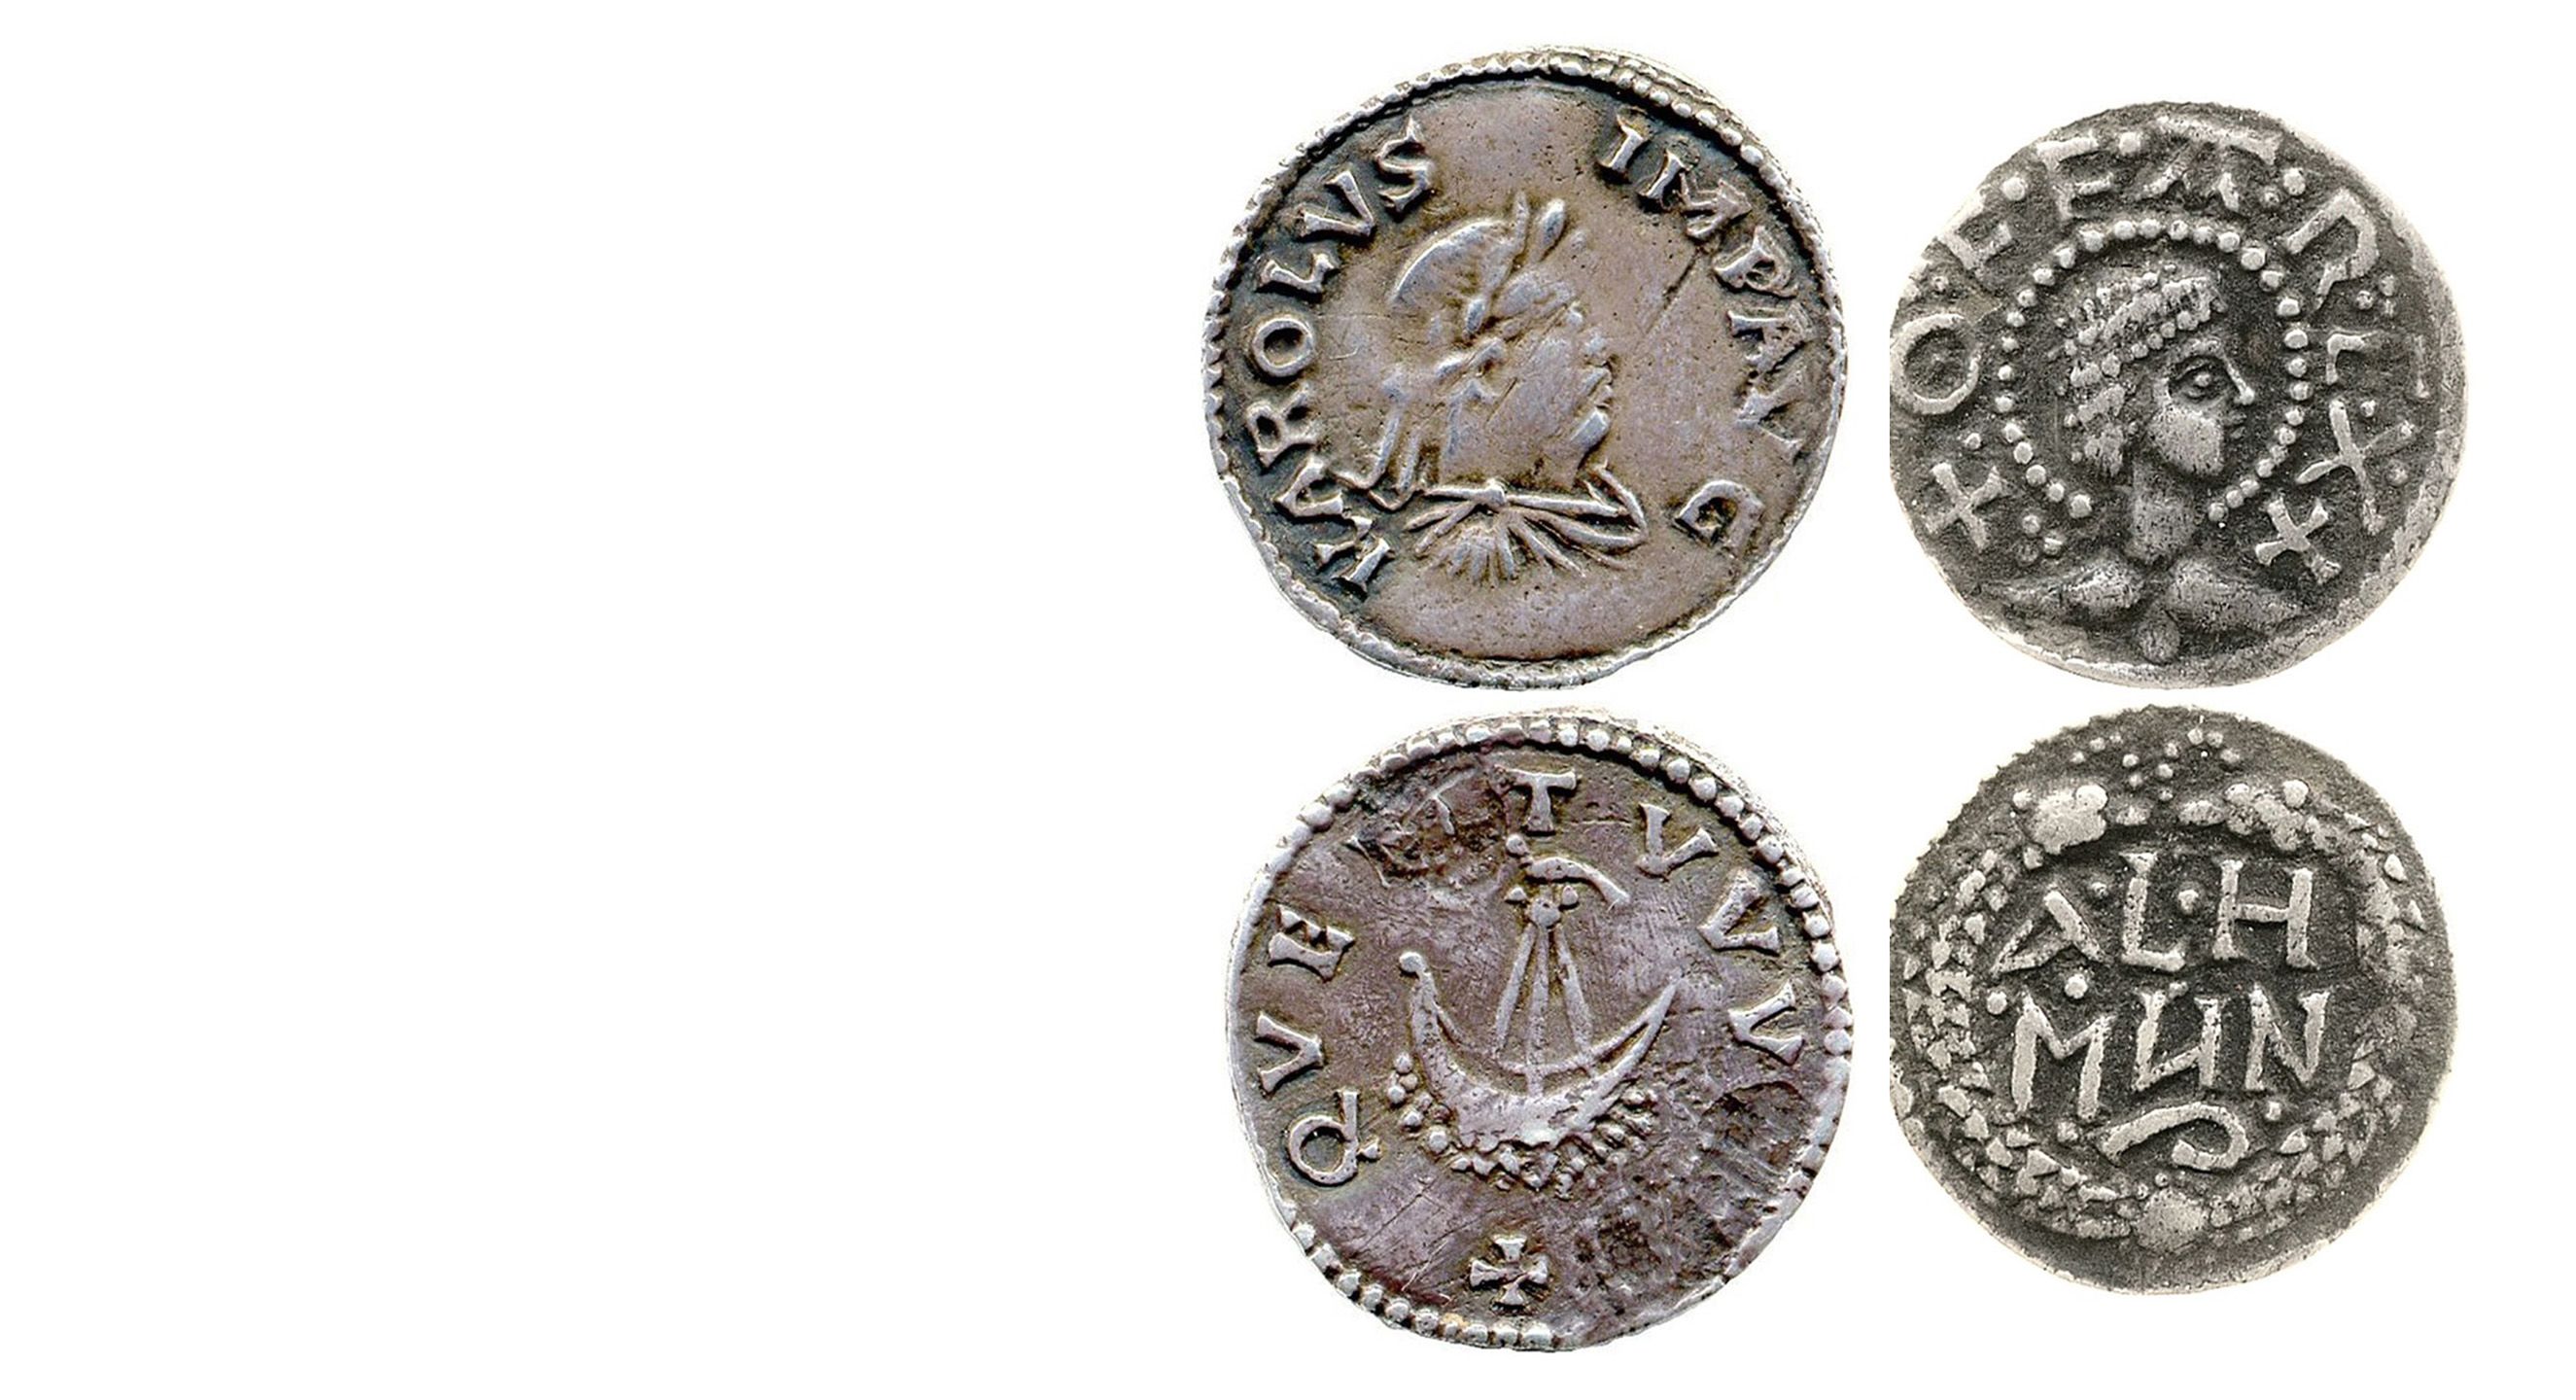 (Left) A coin of Charlemagne (768-814) and (Right) a coin of Offa (757-96), both from the Fitzwilliam Museum. © The Fitzwilliam Museum, University of Cambridge